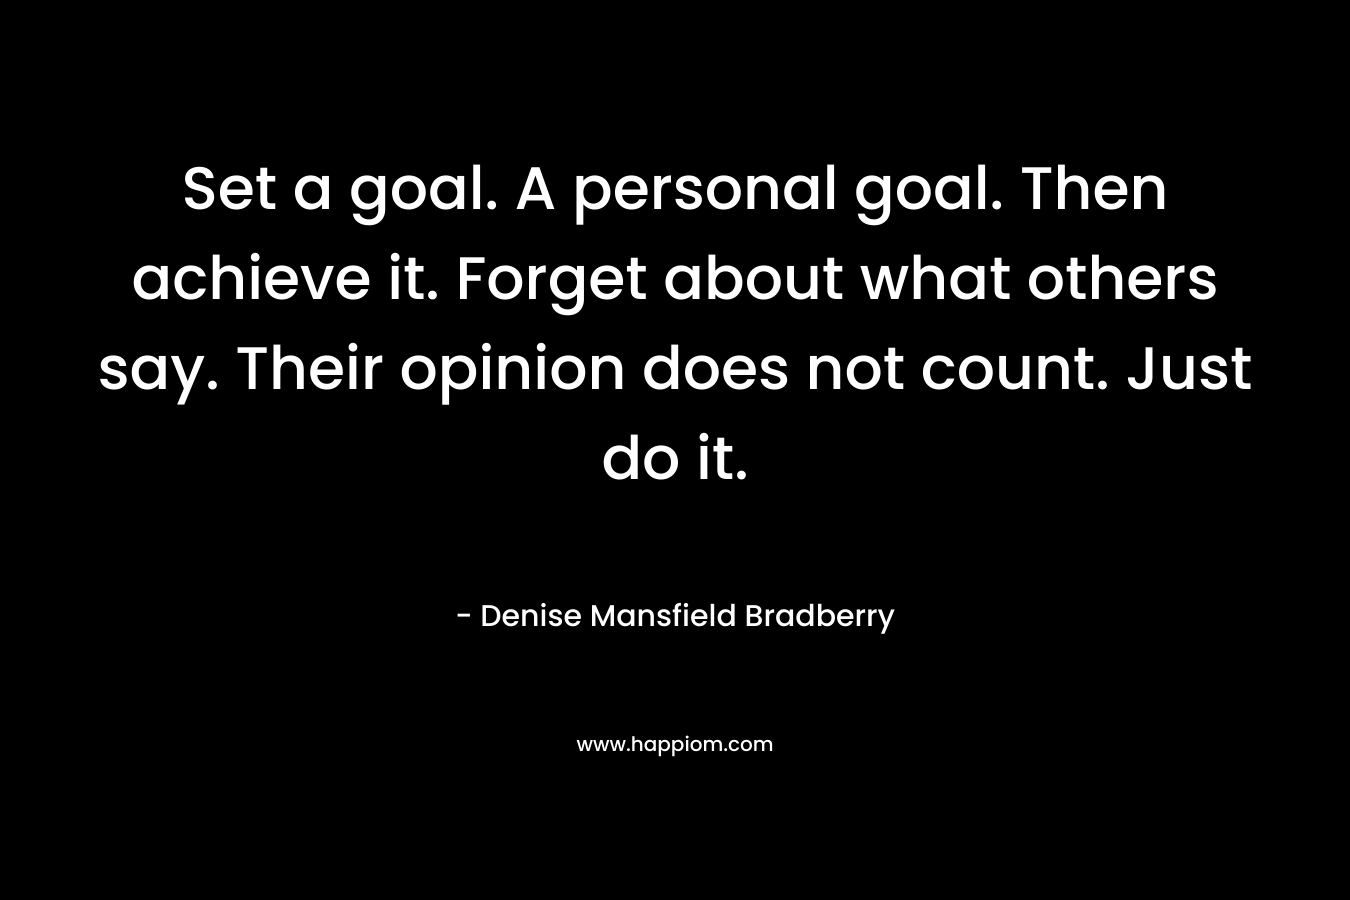 Set a goal. A personal goal. Then achieve it. Forget about what others say. Their opinion does not count. Just do it. – Denise Mansfield Bradberry